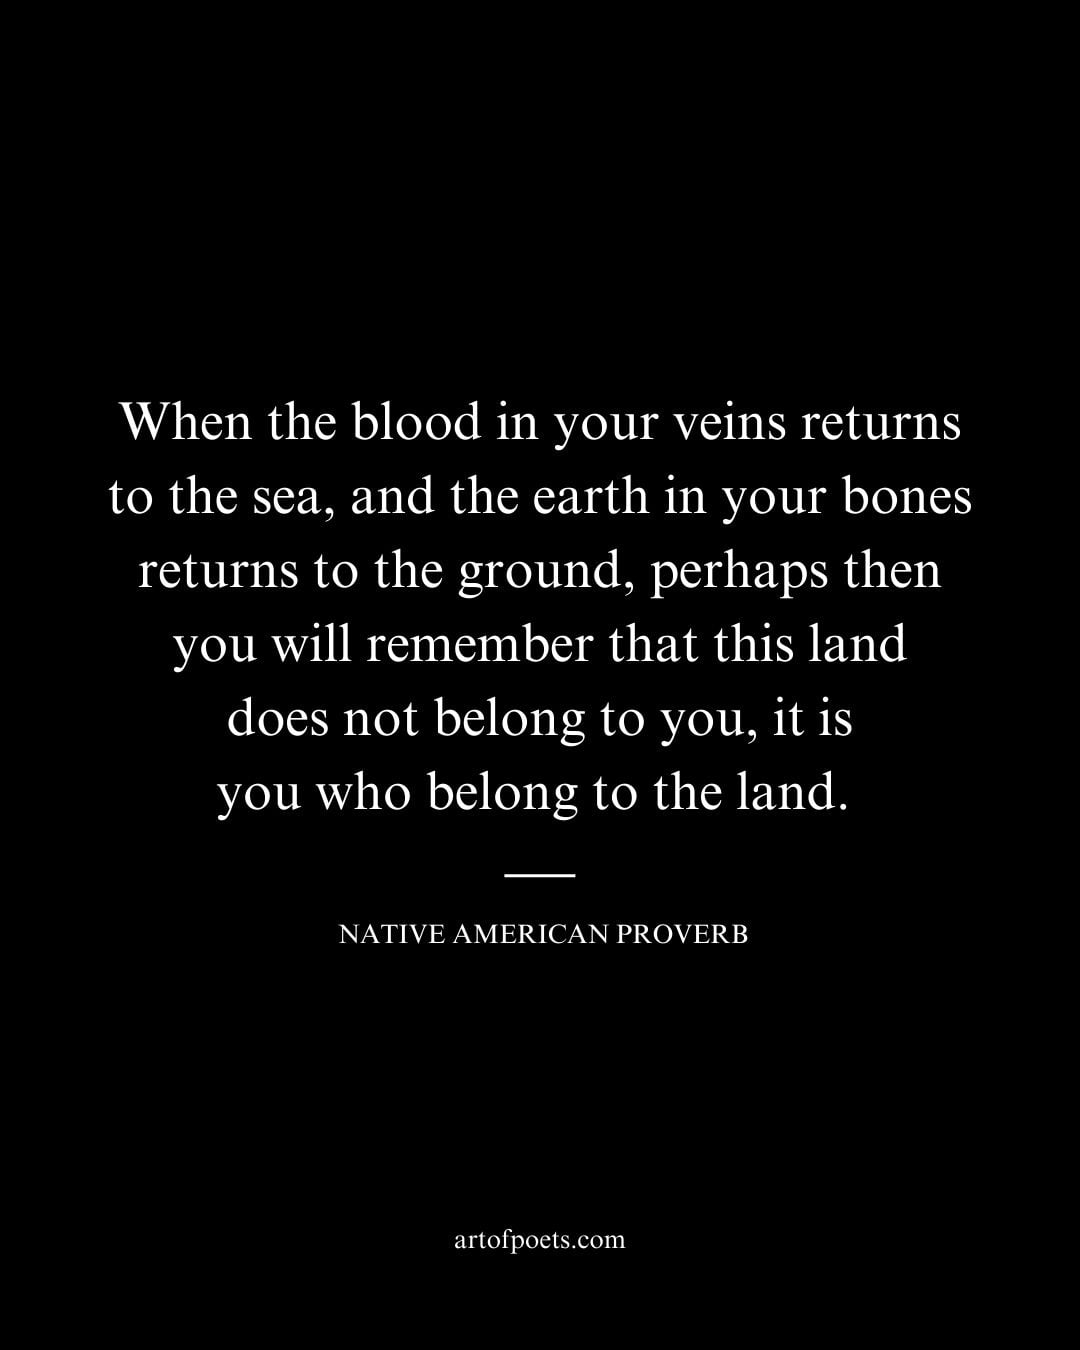 When the blood in your veins returns to the sea and the earth in your bones returns to the ground perhaps then you will remember